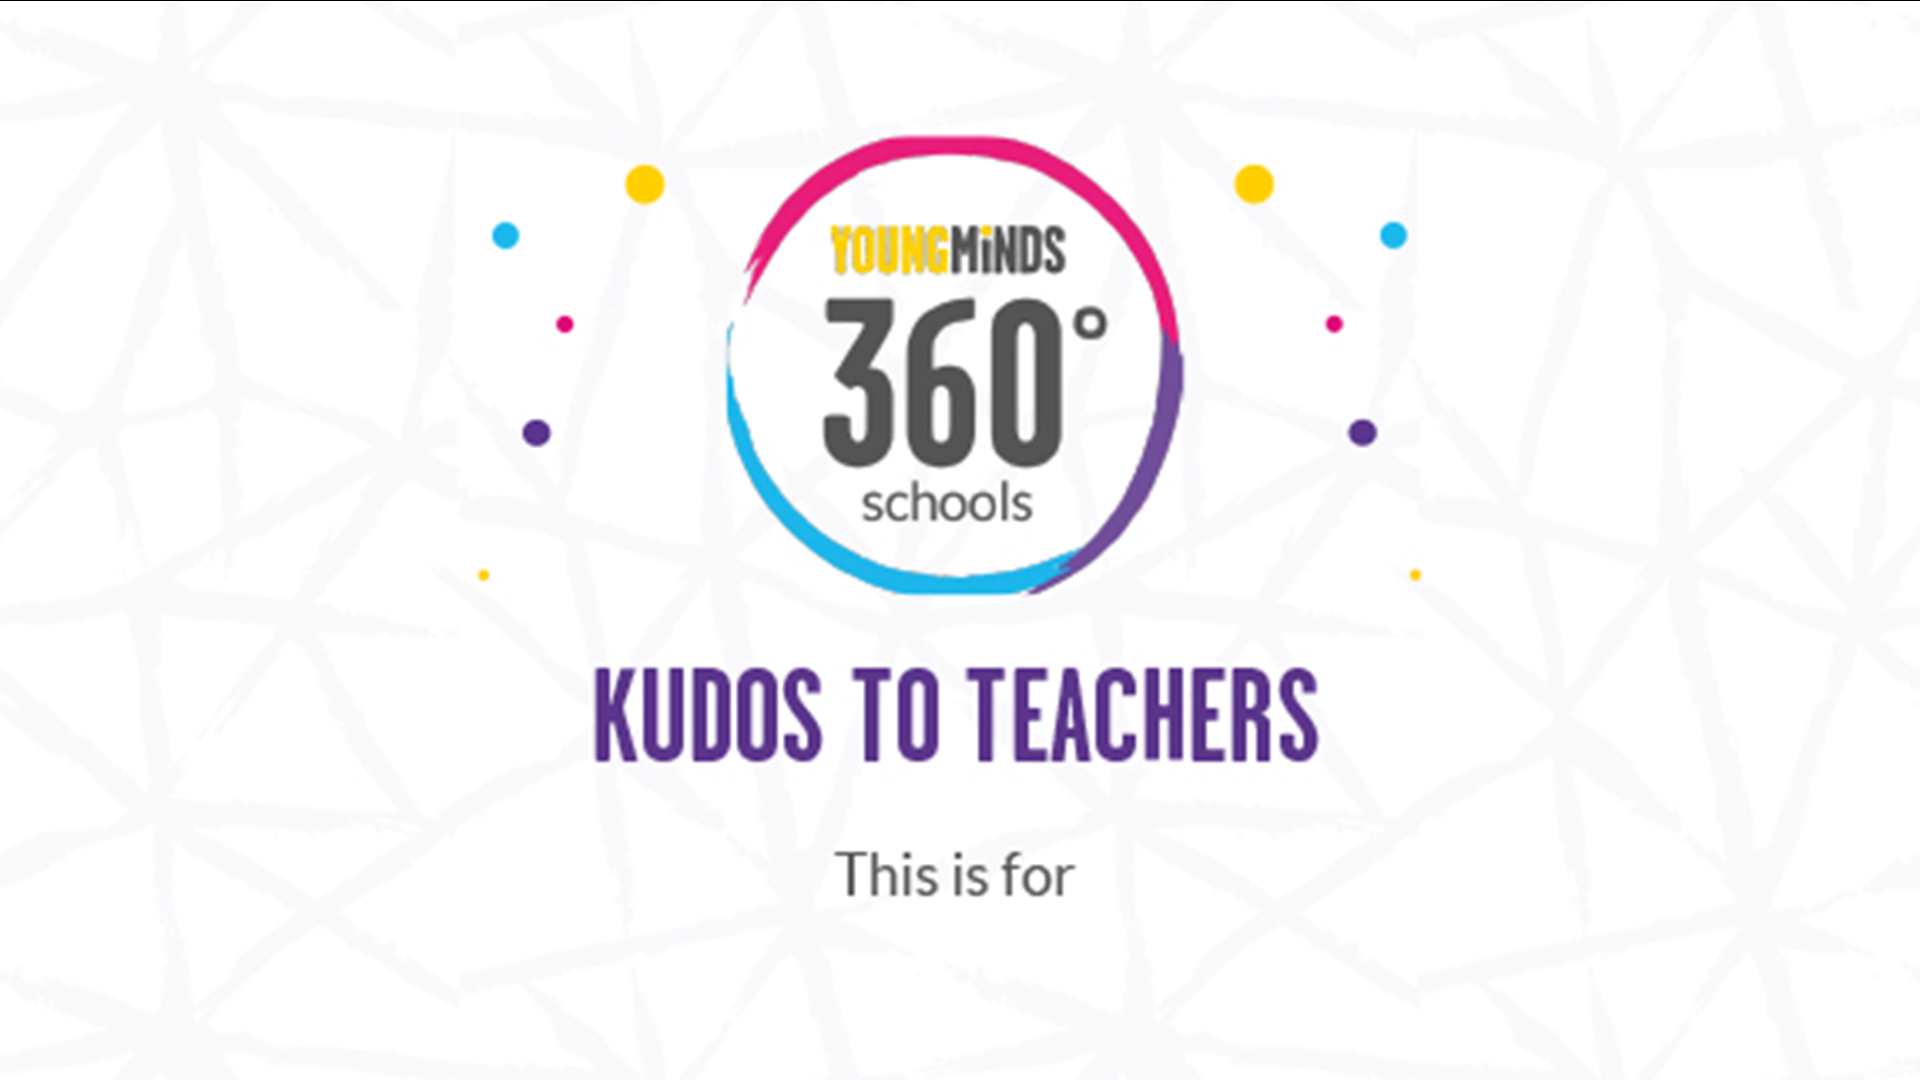 On a purple background is a white square with textured edged. In the white square is our 360 schools logo in the centre and the heading 'Kudos to Teachers', underneath that a quote reads 'Your support has been out of this world, nothing has been too much trouble, and we can't thank you enough.'